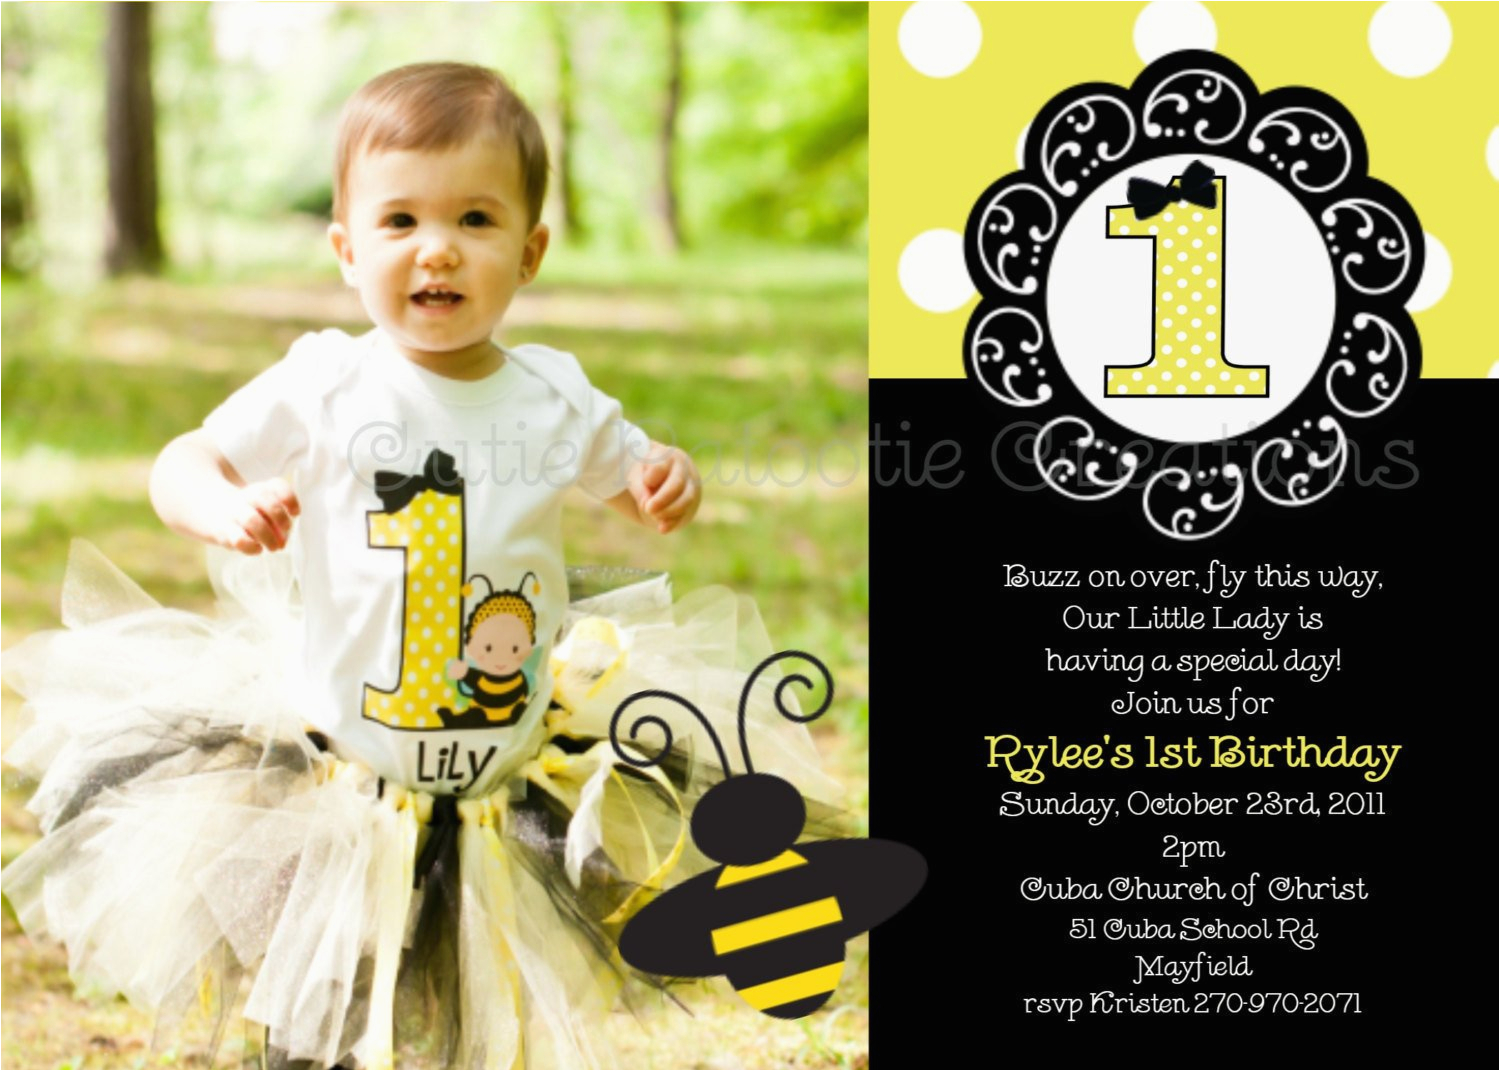 Bumble Bee Birthday Party Invitations Bumble Bee Birthday Party Invitations Bumble Bee by